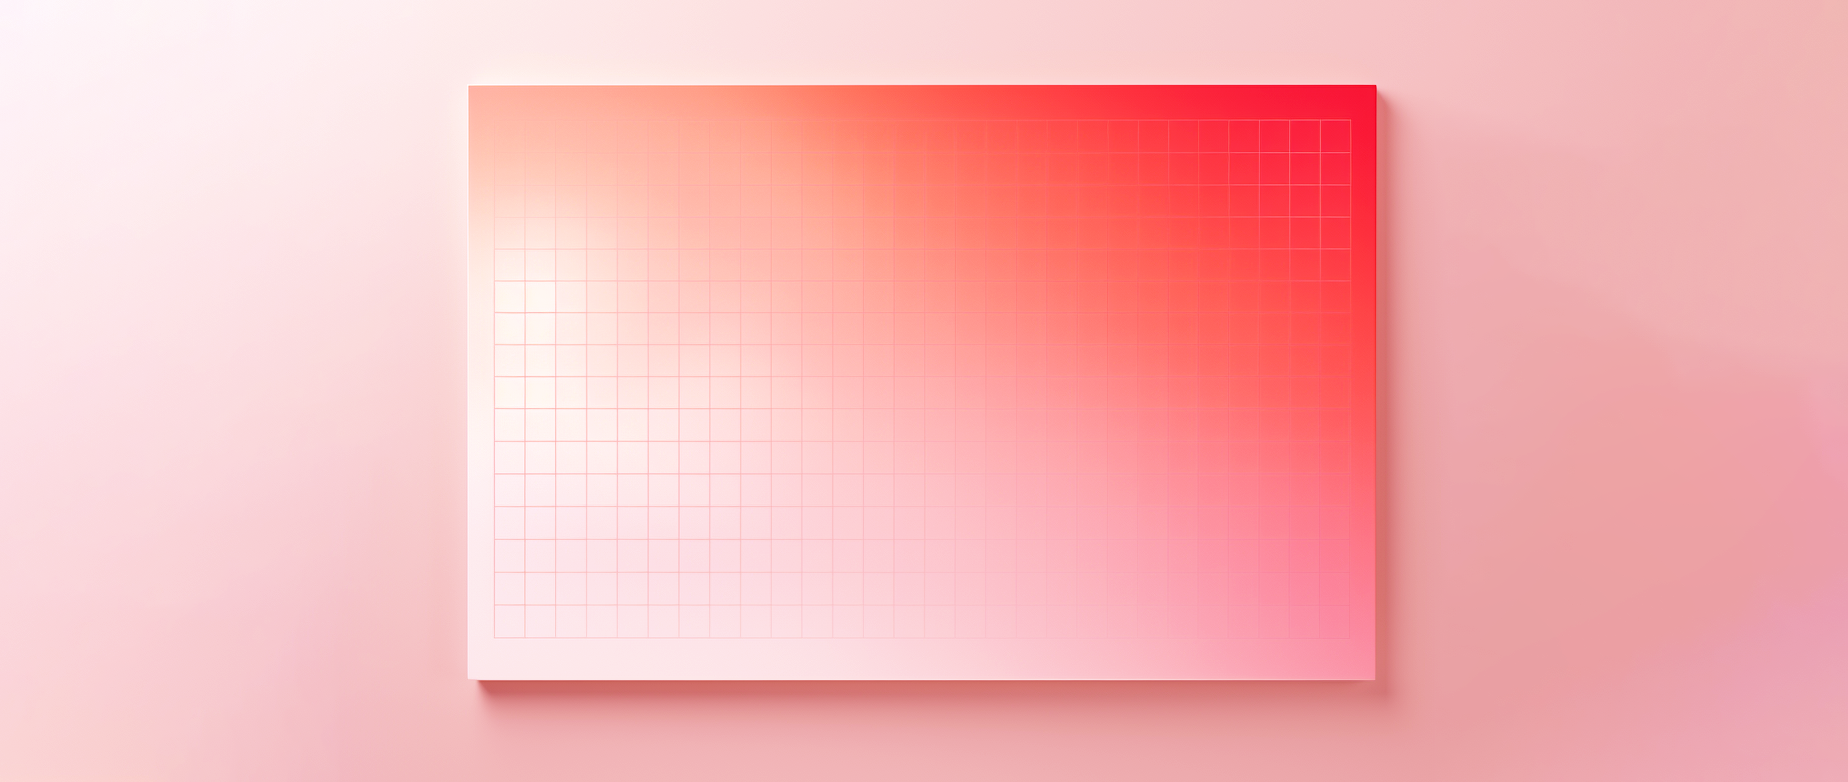 Red and white graphing paper on a pink background.